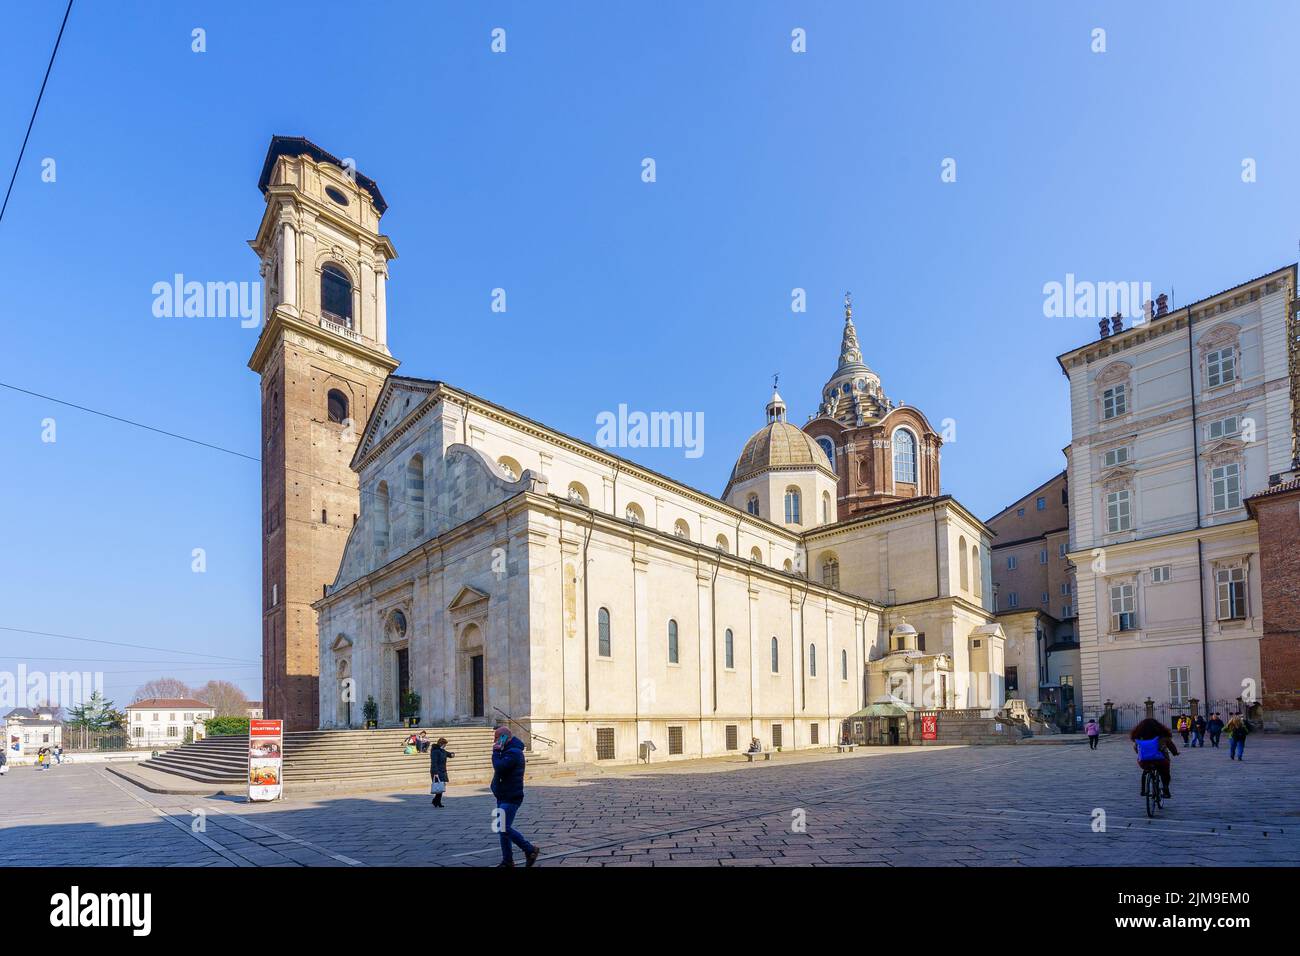 Turin, Italy - February 25, 2022: View of the Cathedral of Saint John the Baptist (Duomo), with locals and visitors, in Turin, Piedmont, Northern Ital Stock Photo